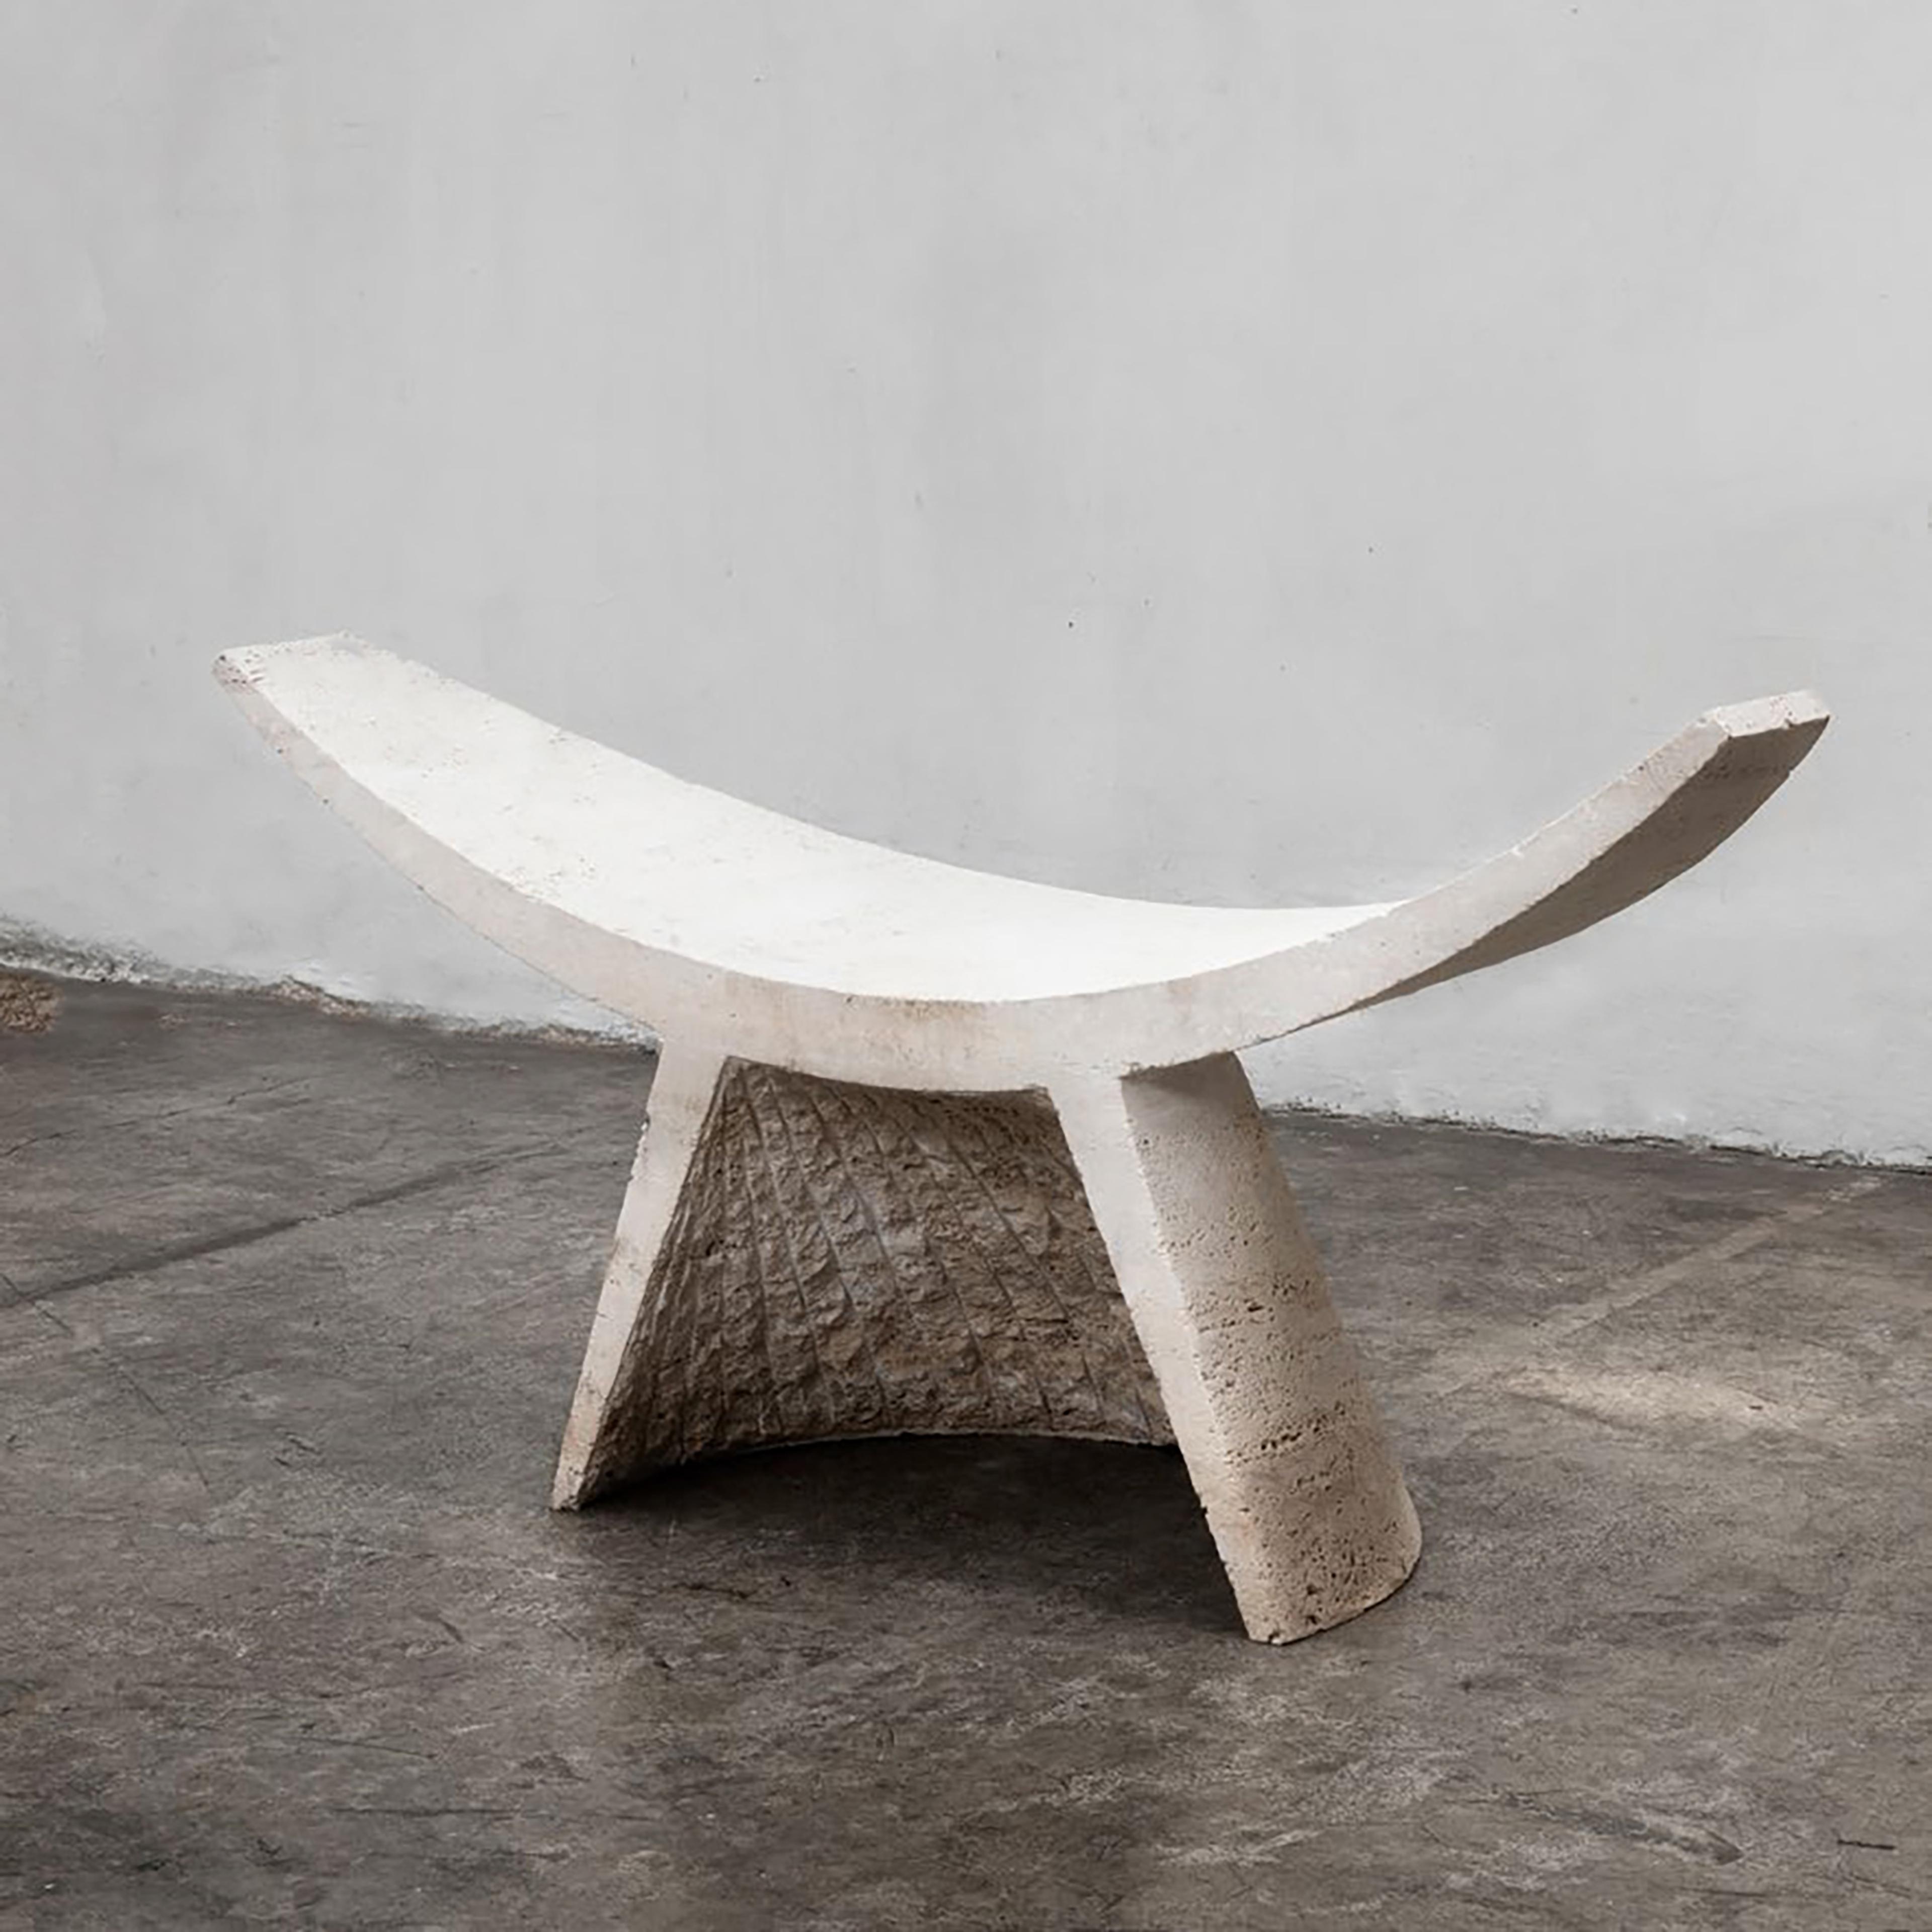 Ateliers Courbet: Ewe Studio Design Collection Hand Crafted in Mexico